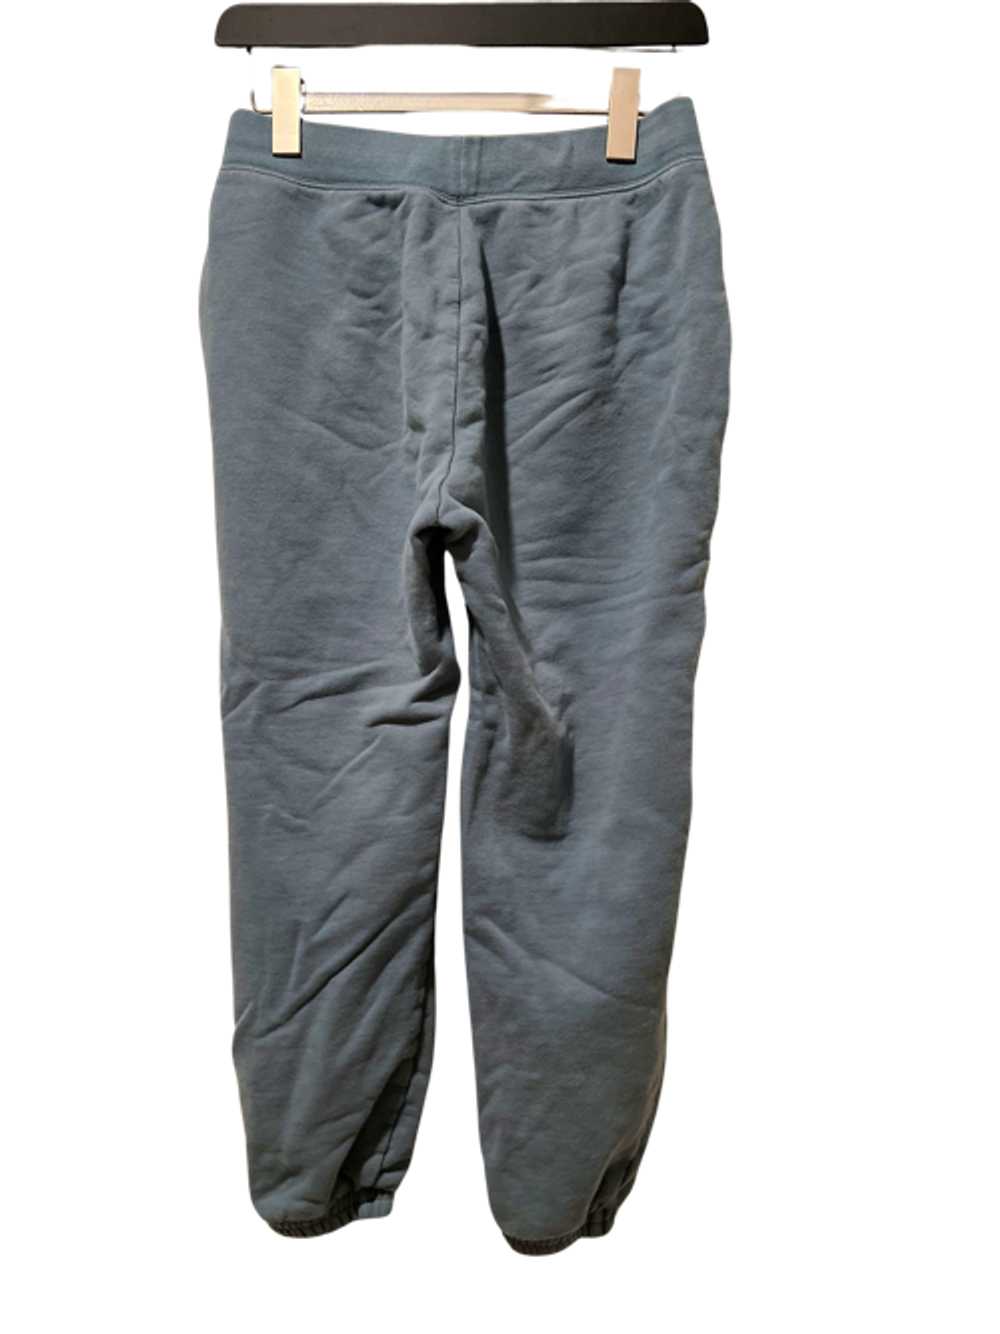 Girlfriend Collective Lagoon 50/50 Classic Jogger - image 5